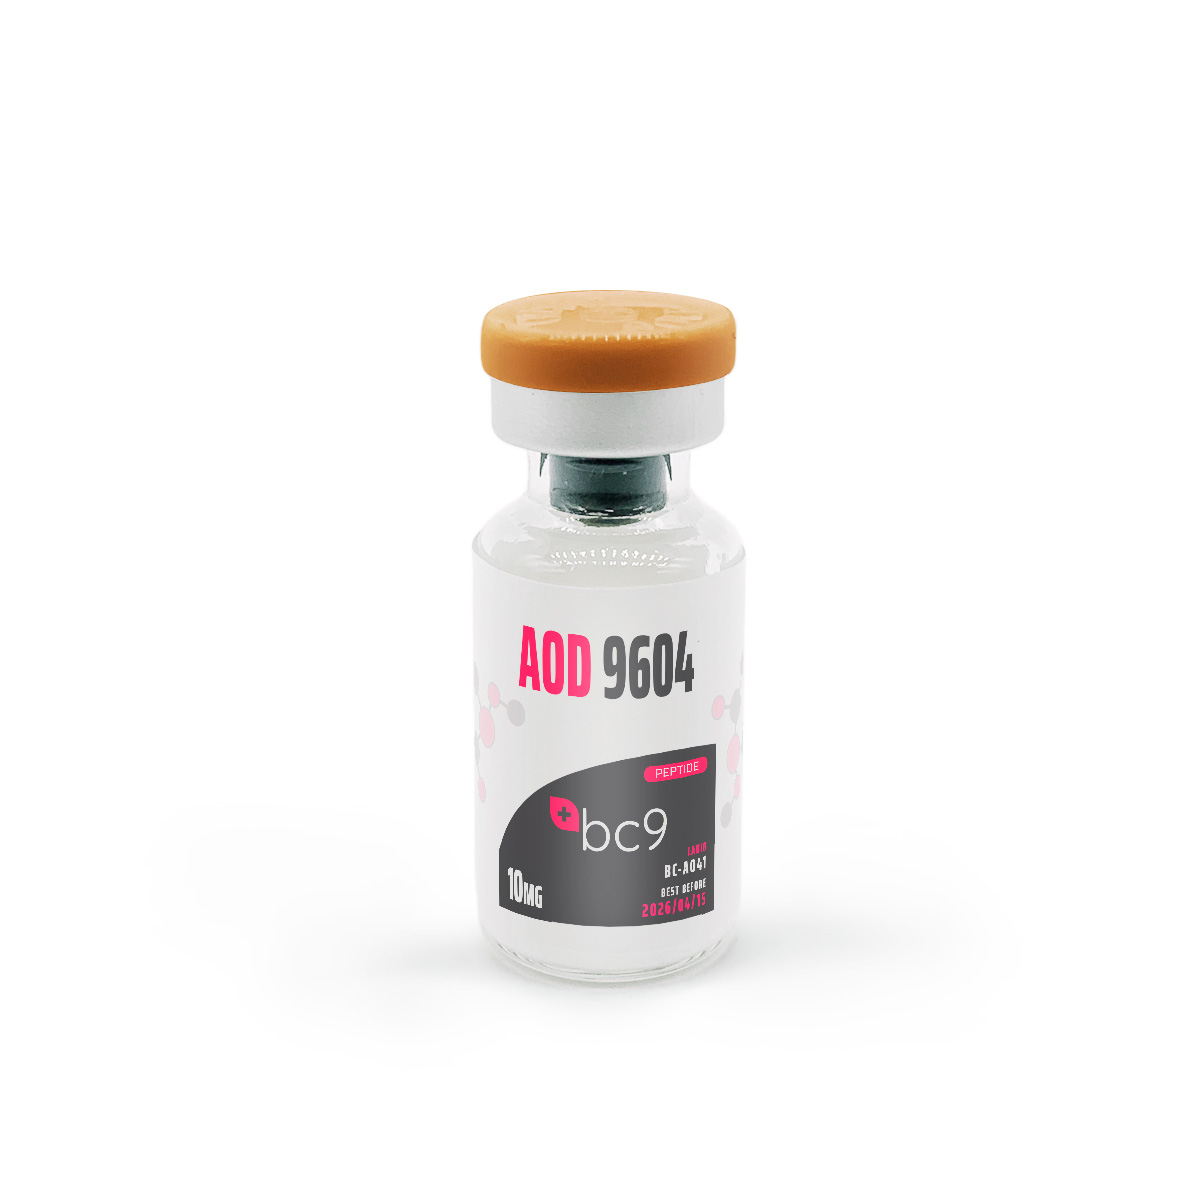 AOD 9604 Peptide for Sale | Fast Shipping | BC9.org